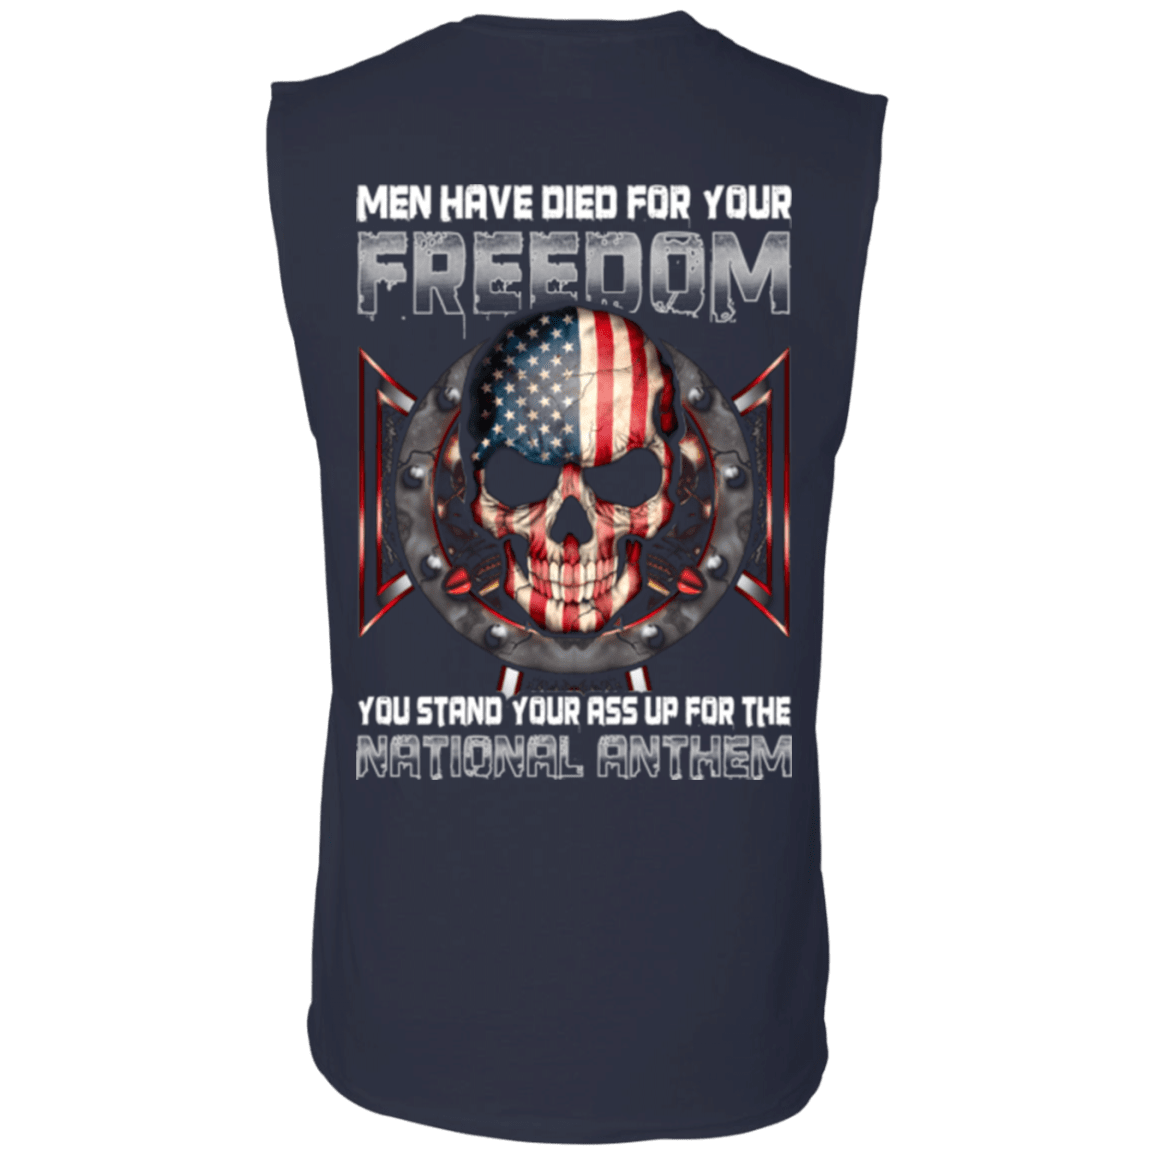 Military T-Shirt "Men Have Died For Youe Freedom Stand Up For The National Anthem"-TShirt-General-Veterans Nation